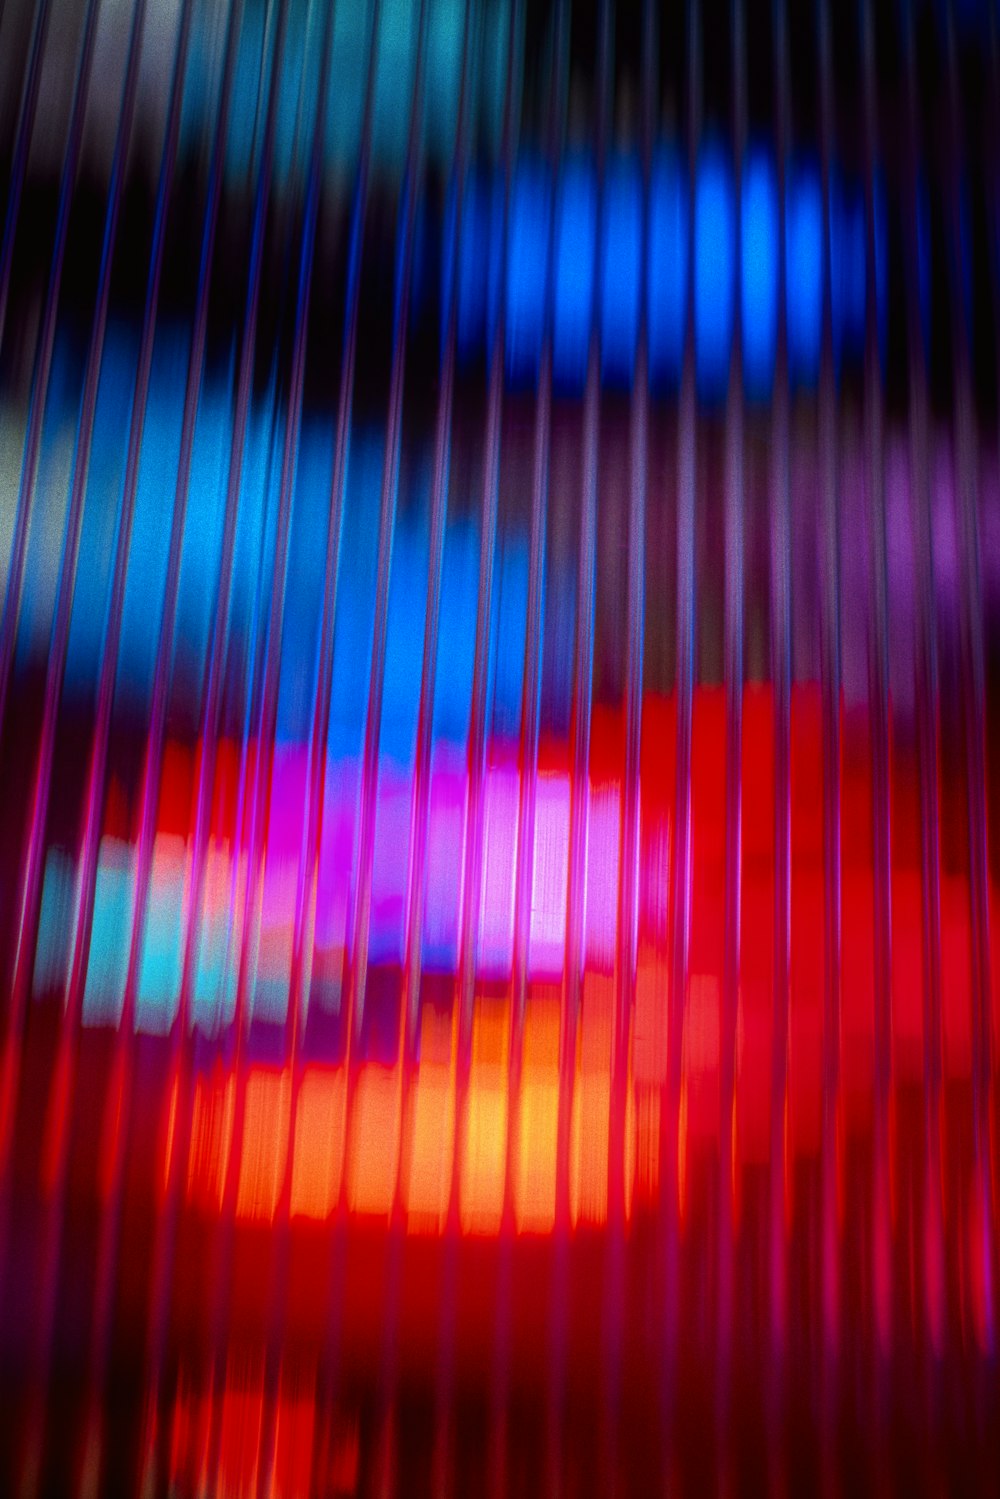 a blurry image of a red, blue, and pink object